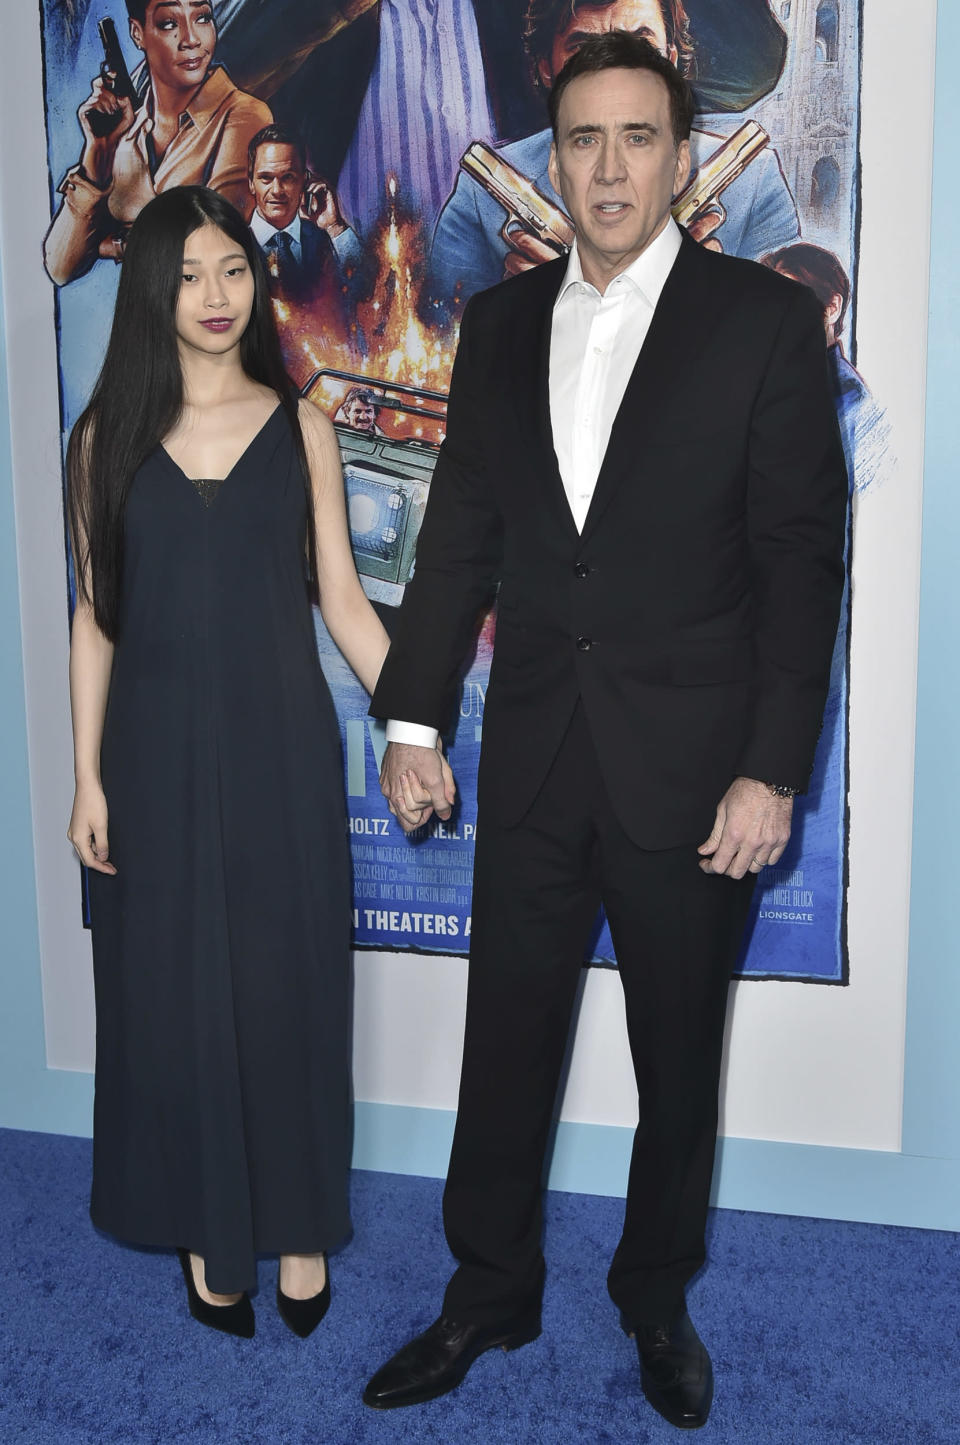 Nicolas Cage, right and Riko Shibata arrive at the premiere of "The Unbearable Weight of Massive Talent" at the Directors Guild of America on Monday, April 18, 2022, in Los Angeles. (Photo by Richard Shotwell/Invision/AP)